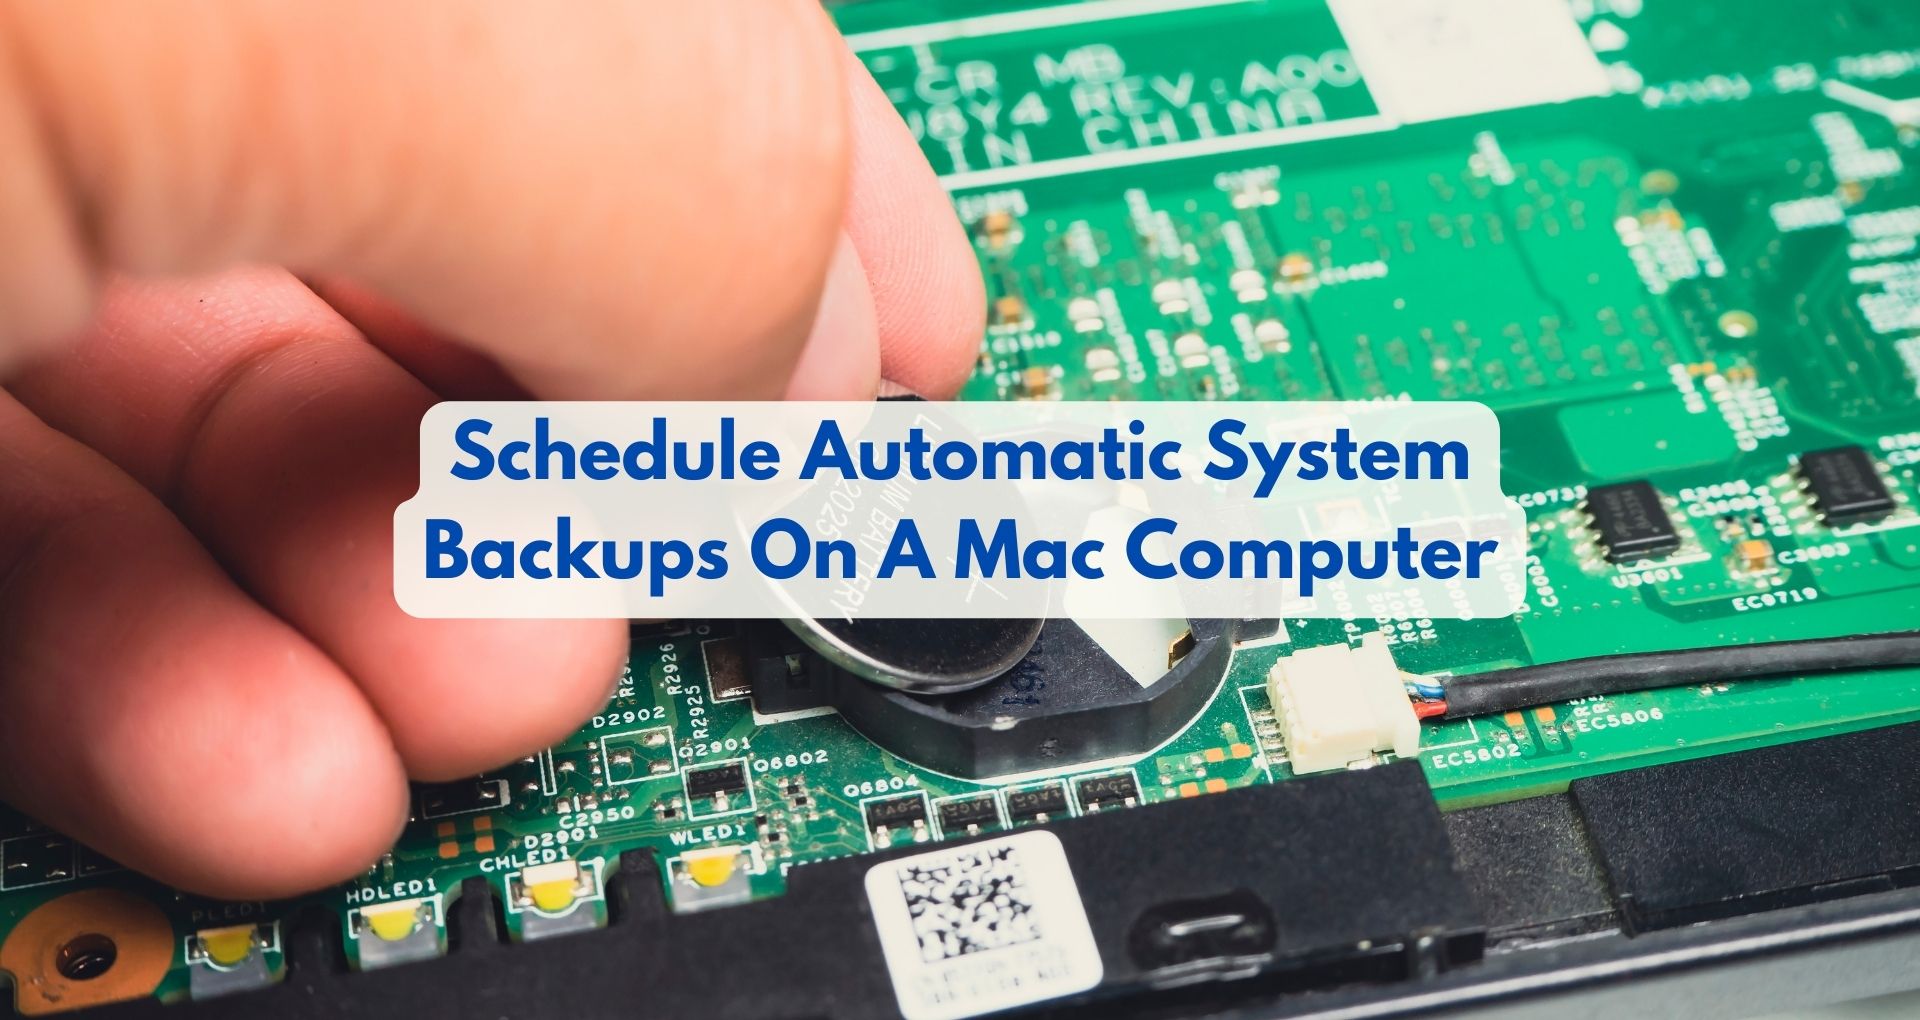 How To Schedule Automatic System Backups On A Mac Computer?